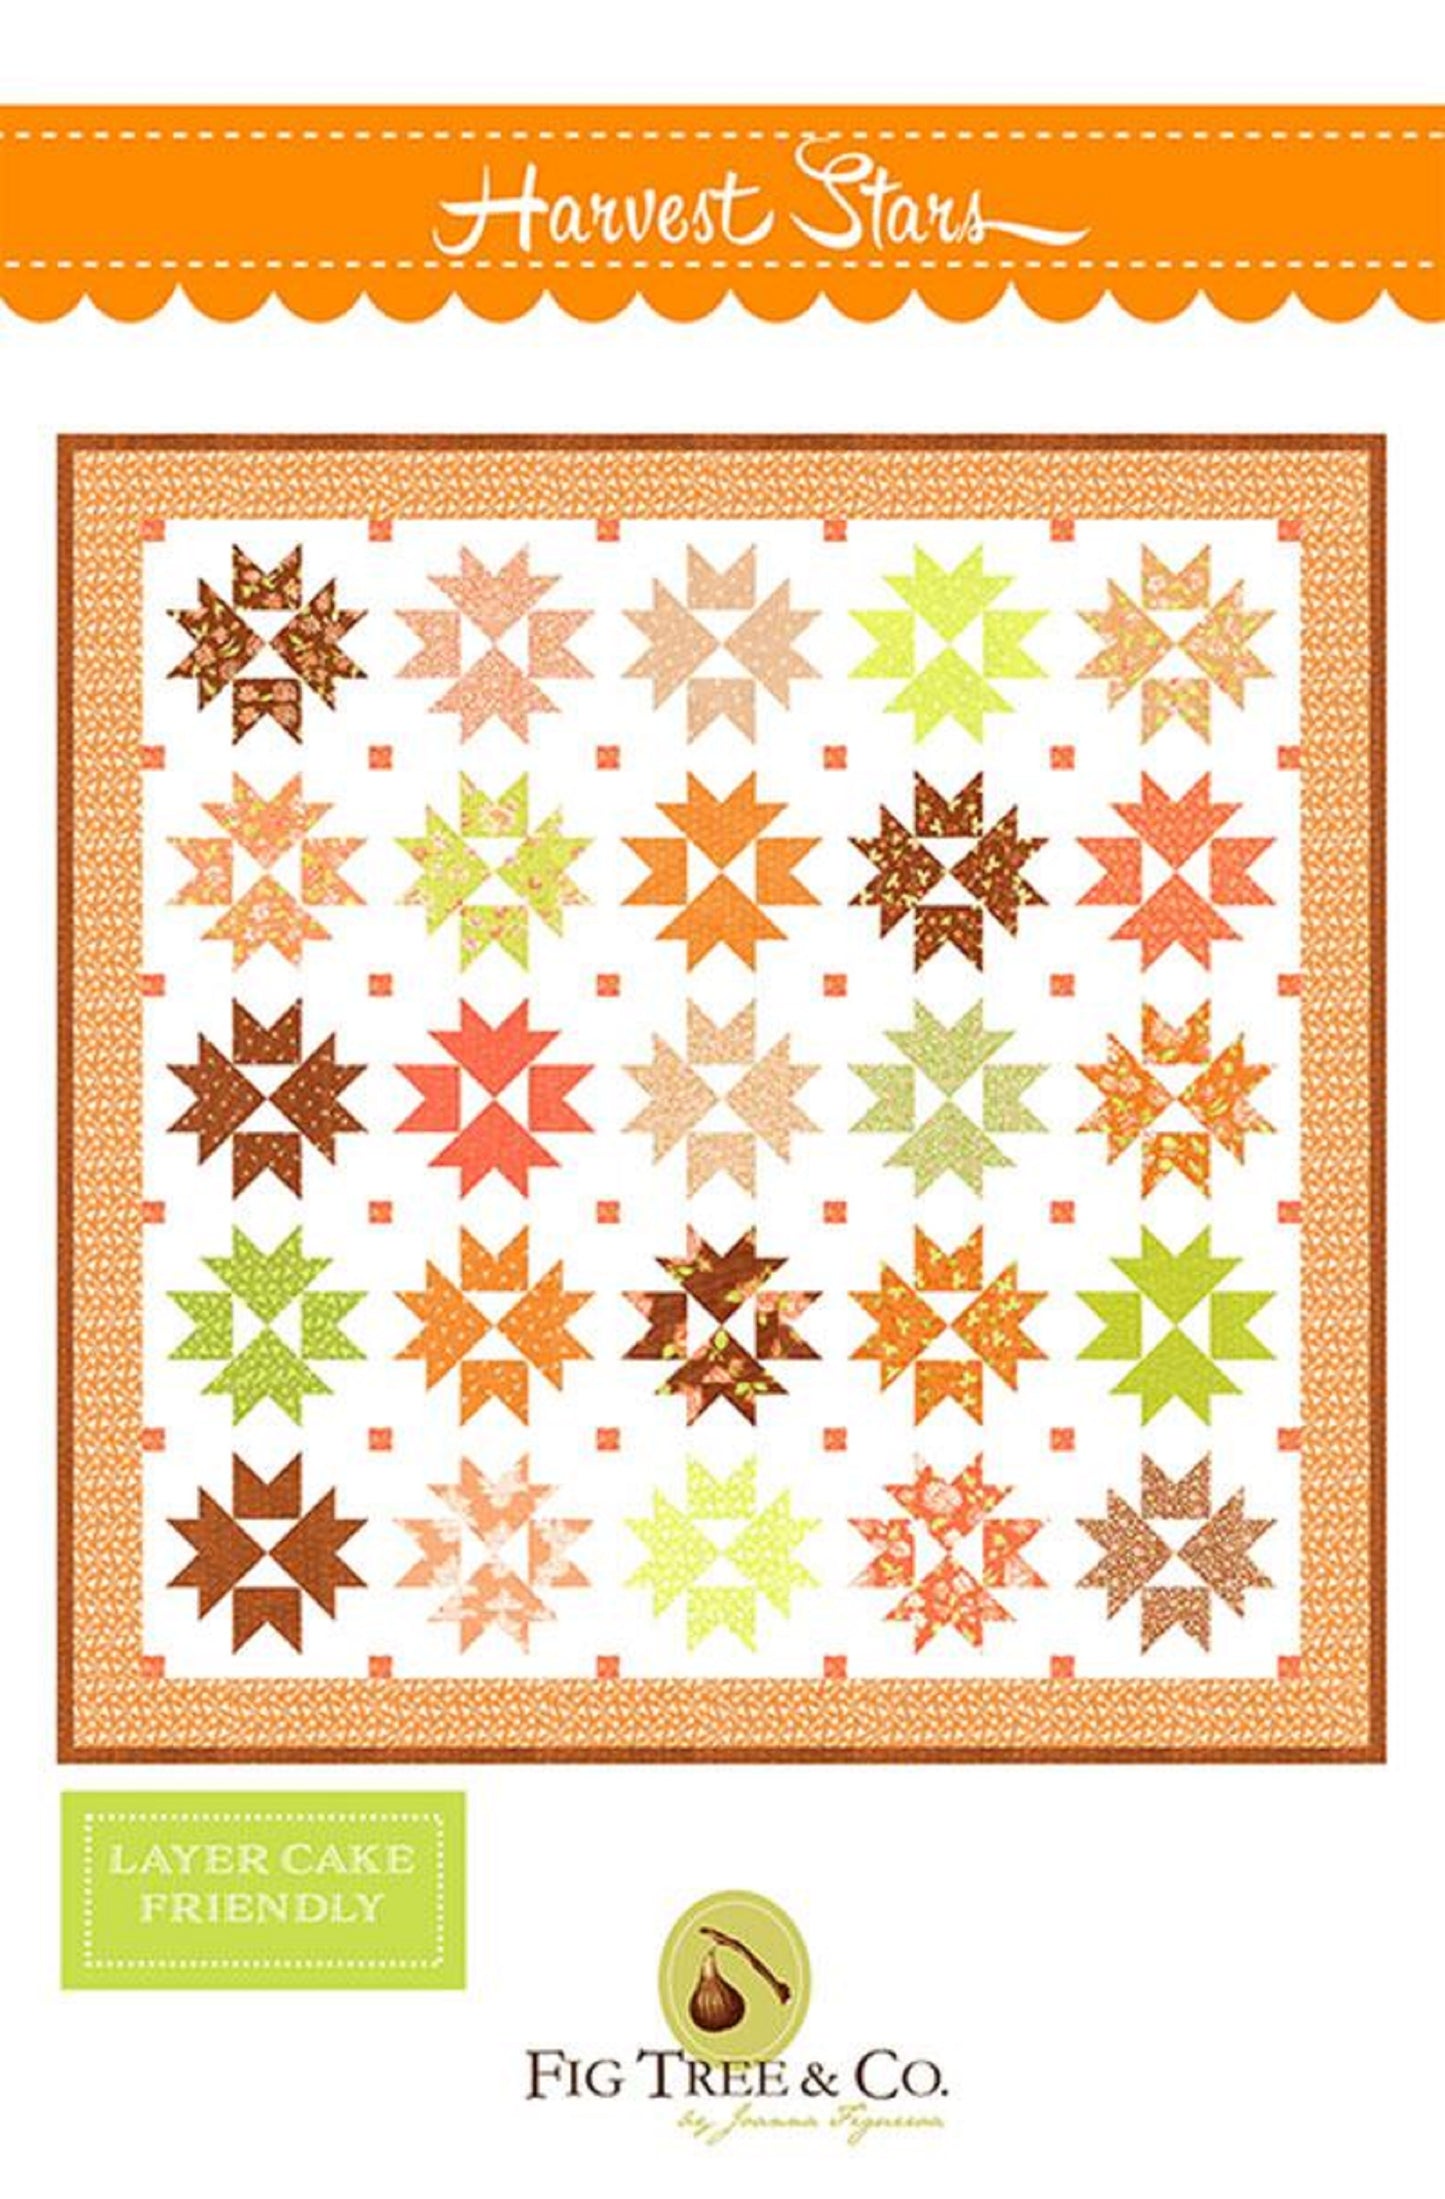 Harvest Stars Quilt Pattern by Fig Tree & Co.